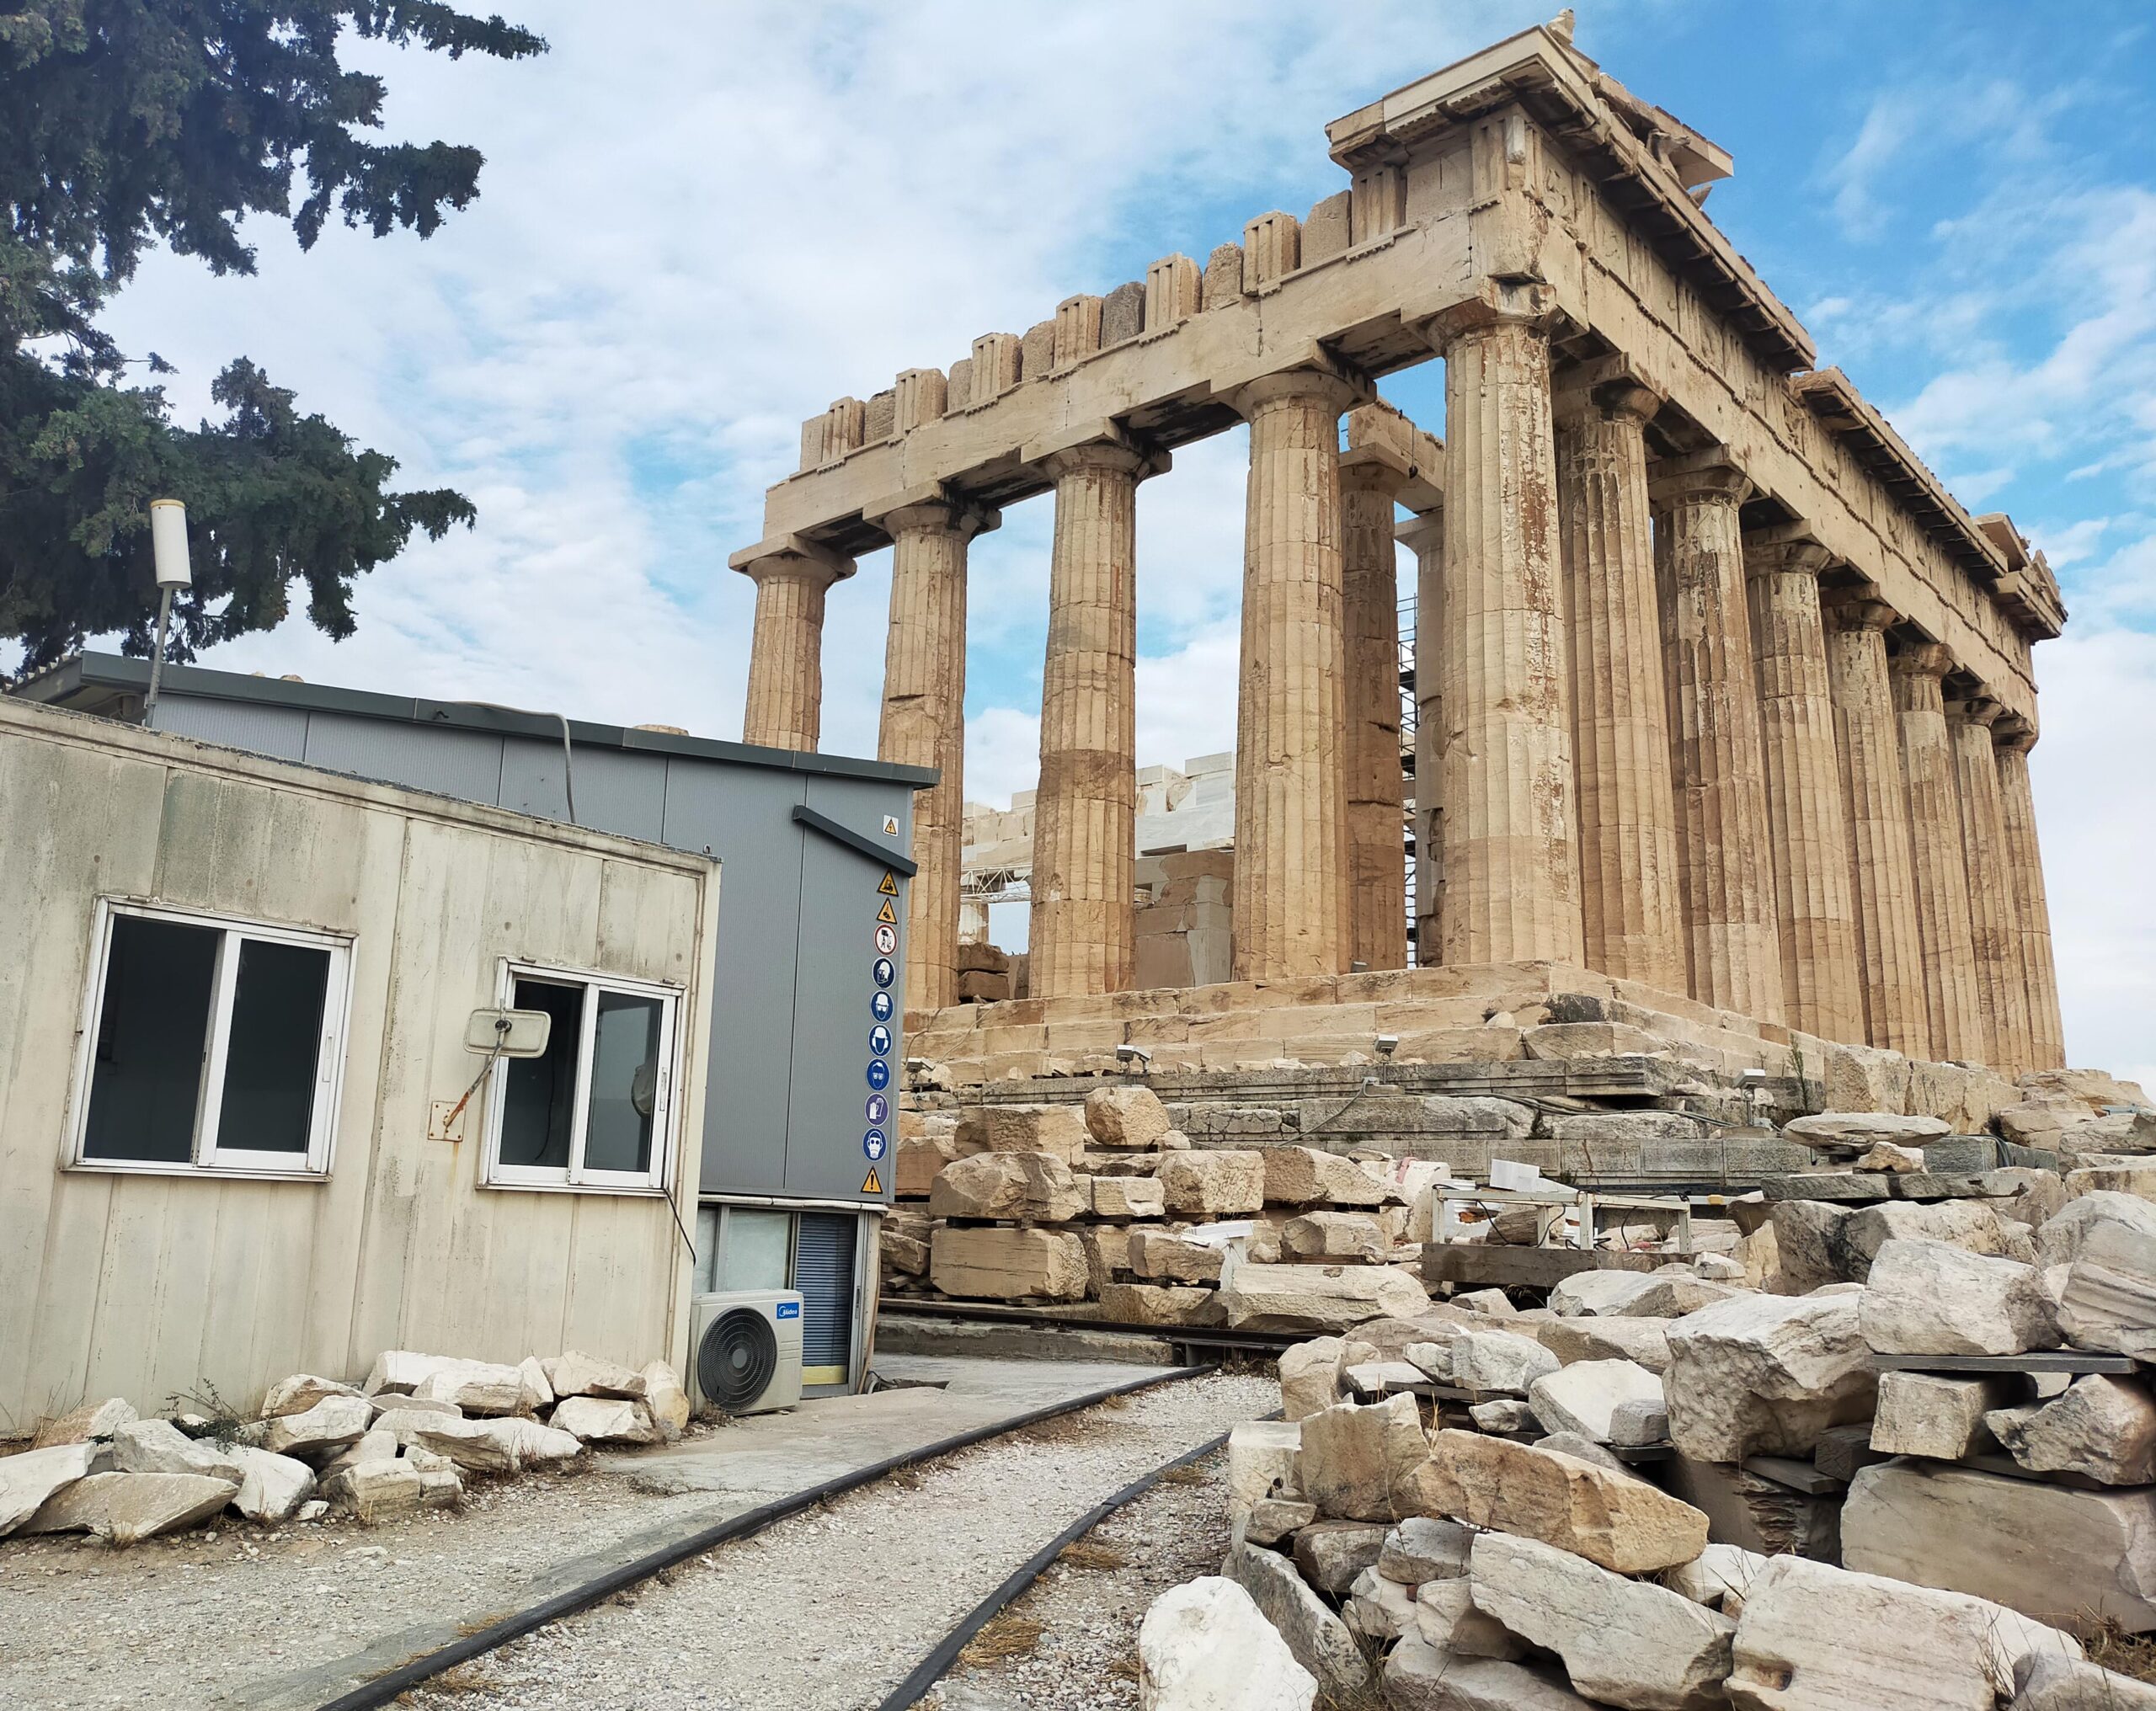 The restoration of the Acropolis